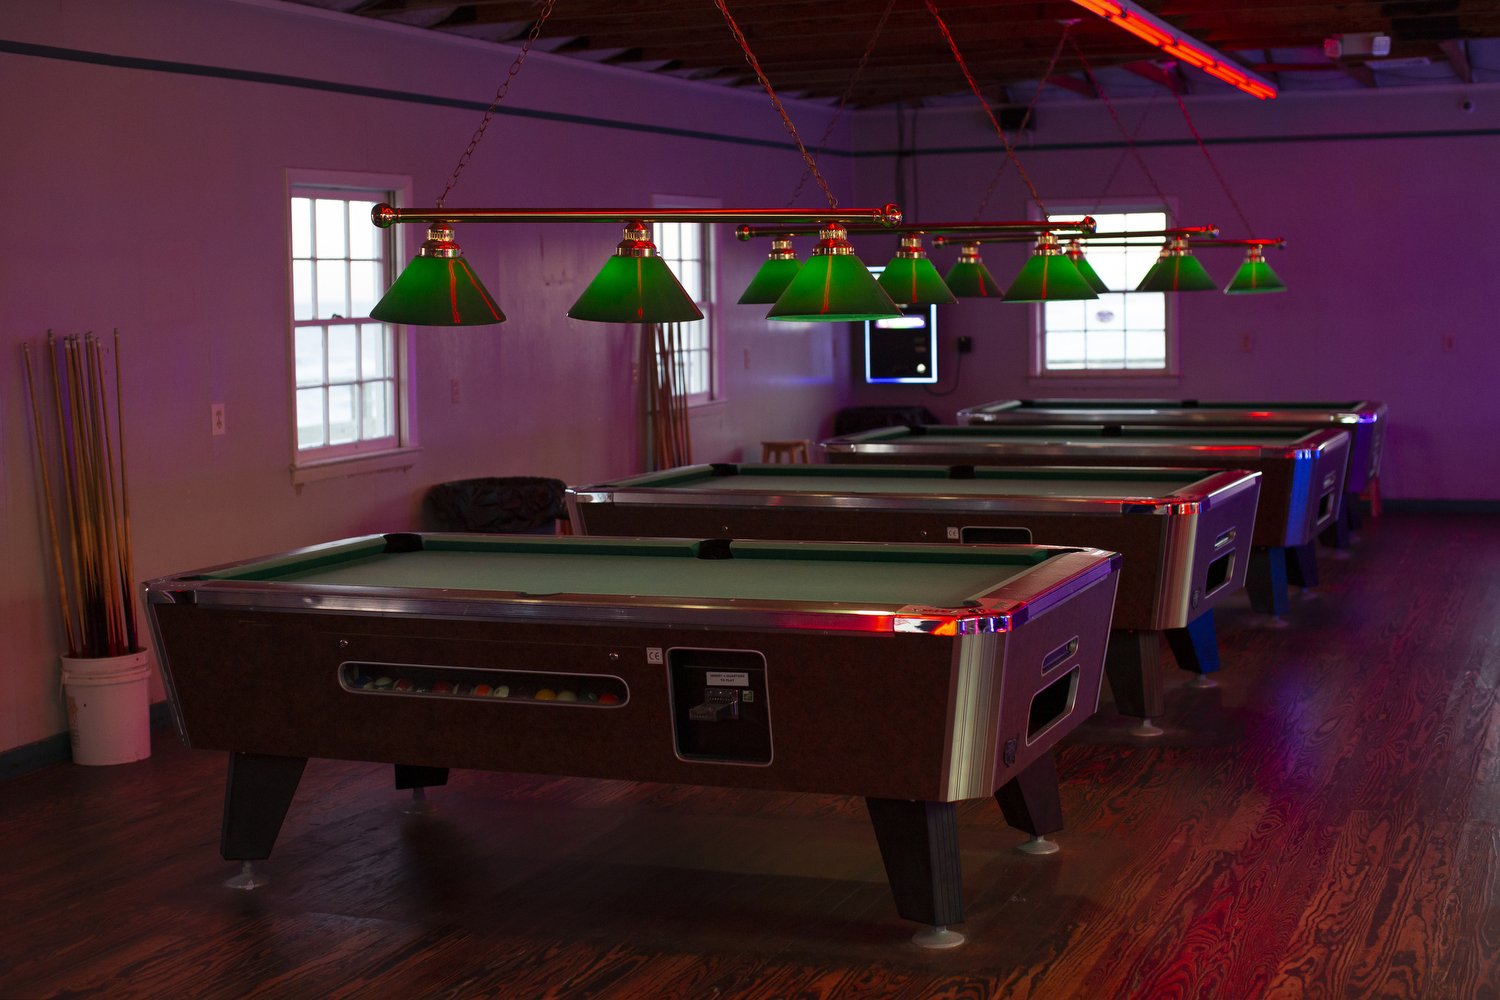  Pool tables sit empty at the pier in Kure Beach, North Carolina.  For The Washington Post 